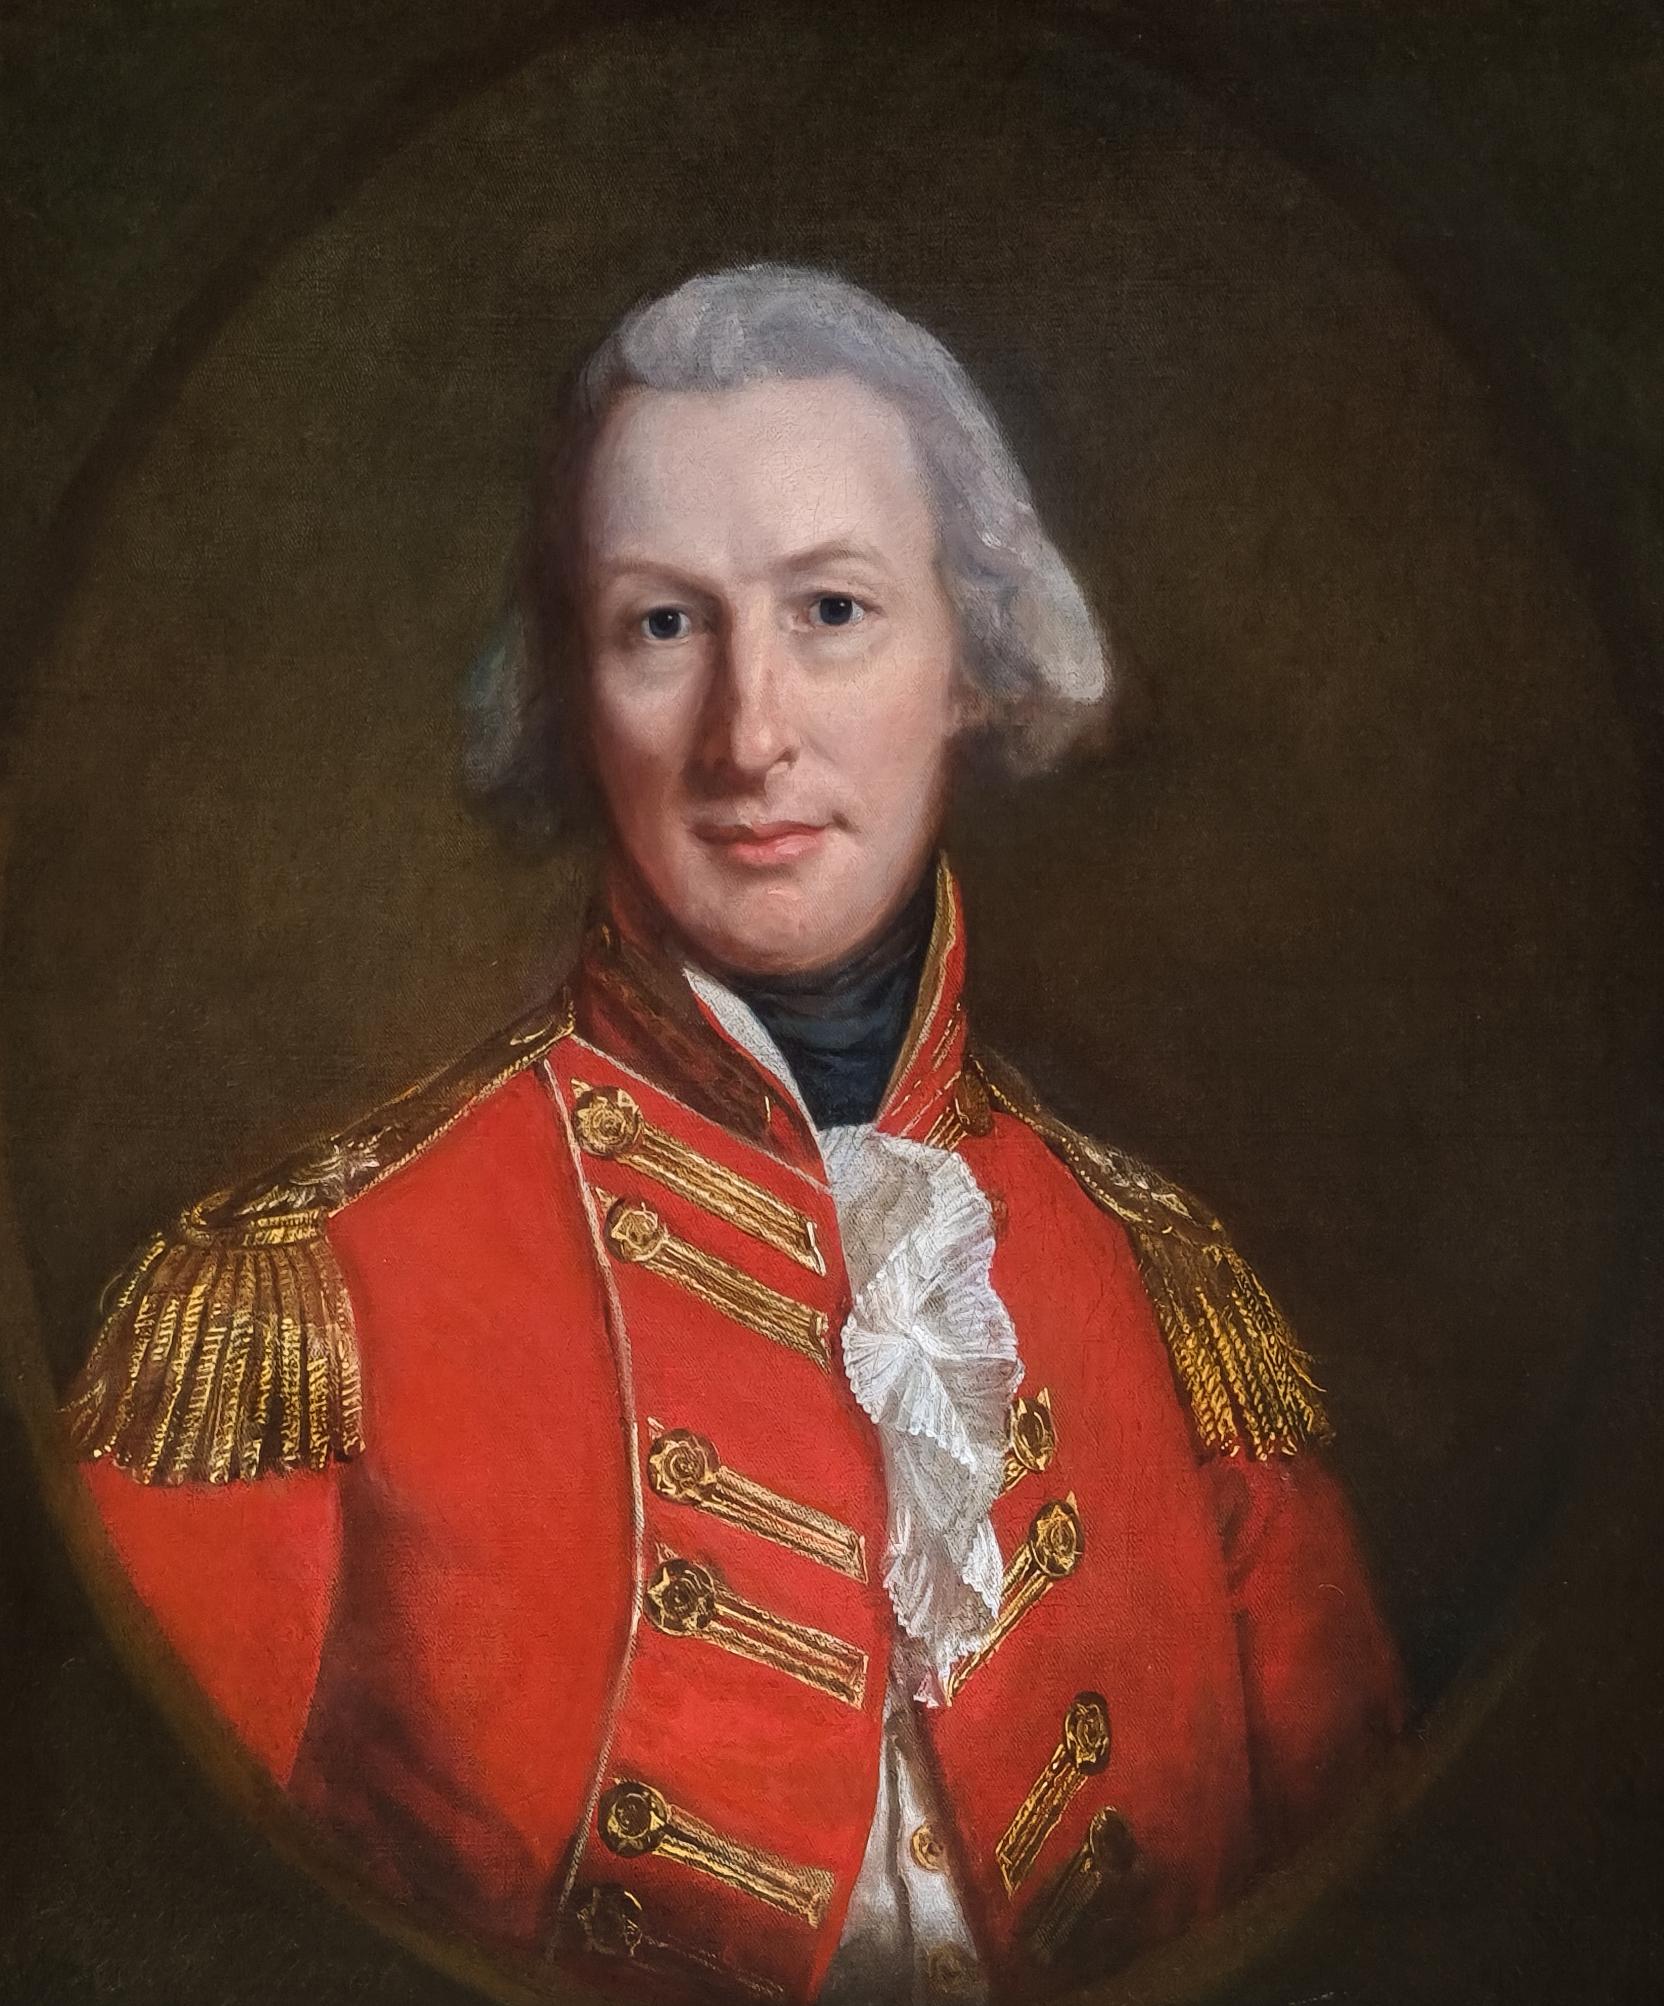 Portrait of Gentleman Officer, Signed & Dated 1796 by Thomas Beach Oil on canvas 2